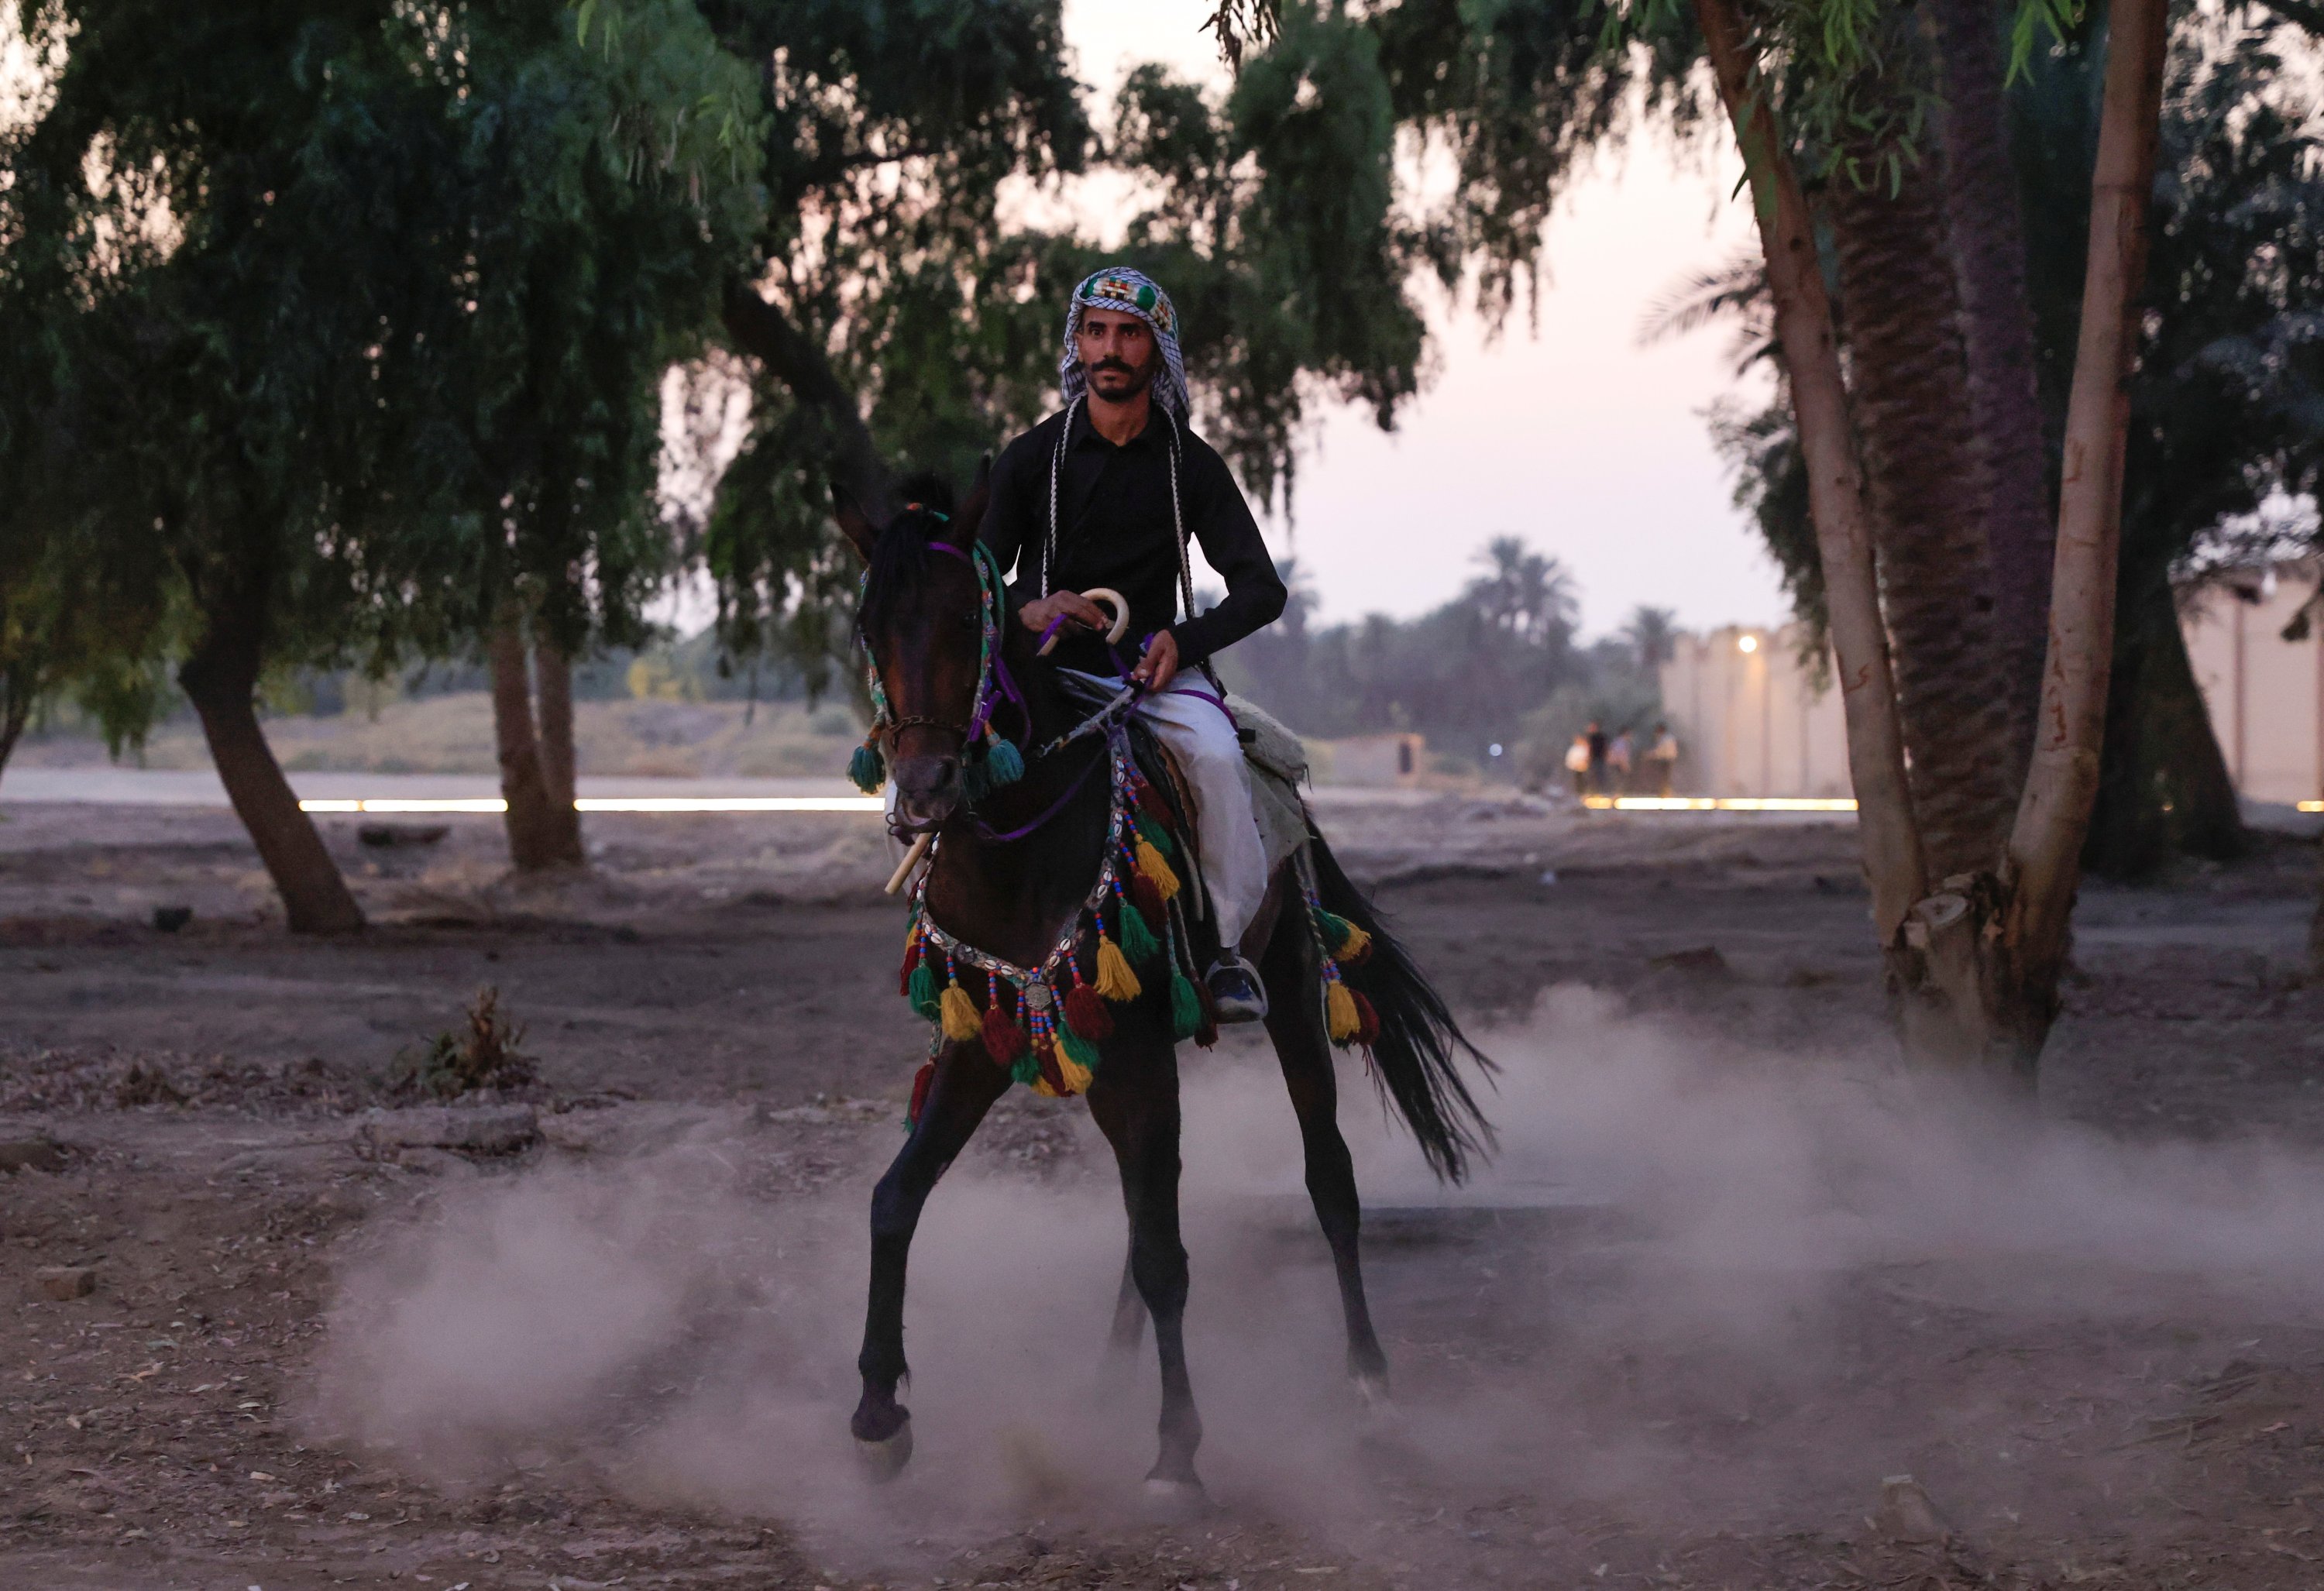 A local actor rides a horse during the opening ceremony of the Babylon International Festival in the ancient city of Babylon, Iraq, Oct. 28, 2021. (REUTERS)